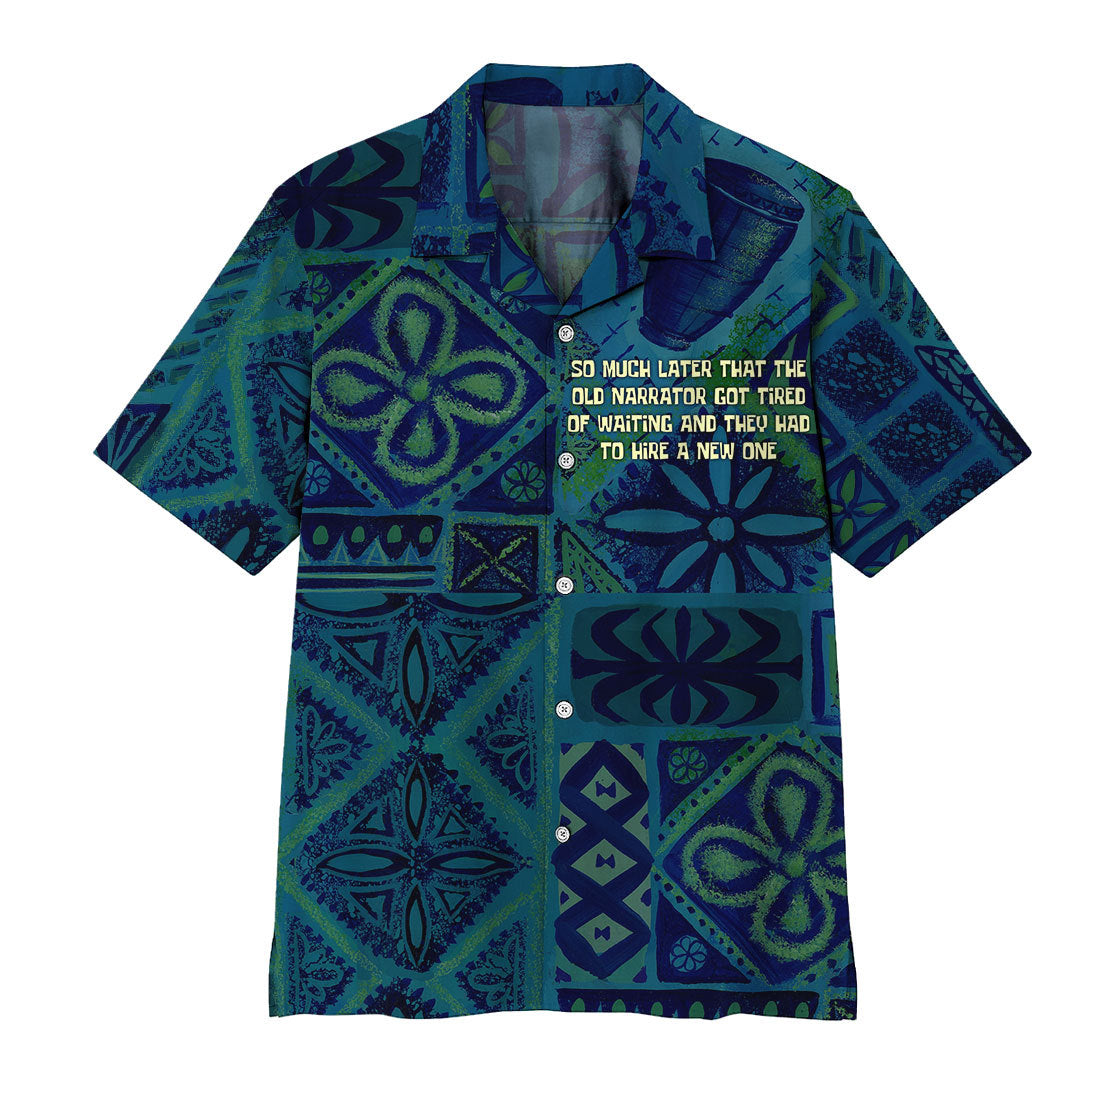 Gearhumans 3D So Much Later That The Old Narrator Got Tired Of Waiting And They Had To Hire A New One Hawaii Shirt